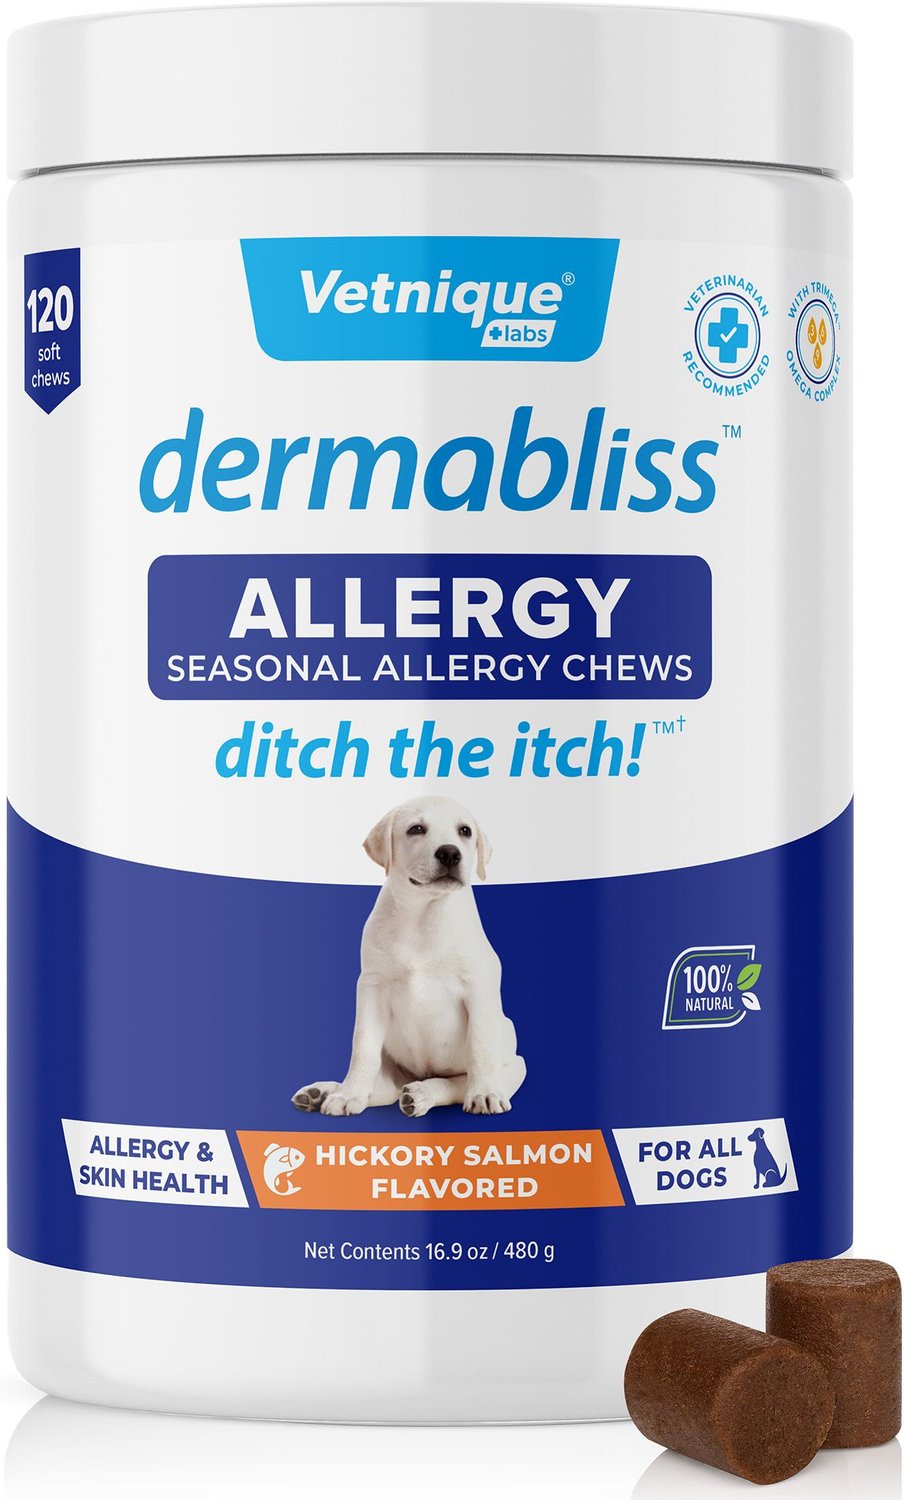  Zesty Paws Dog Allergy Relief - Anti Itch Supplement - Omega 3  Probiotics for Dogs - Salmon Oil Digestive Health - Soft Chews for Skin &  Seasonal Allergies - Epicor